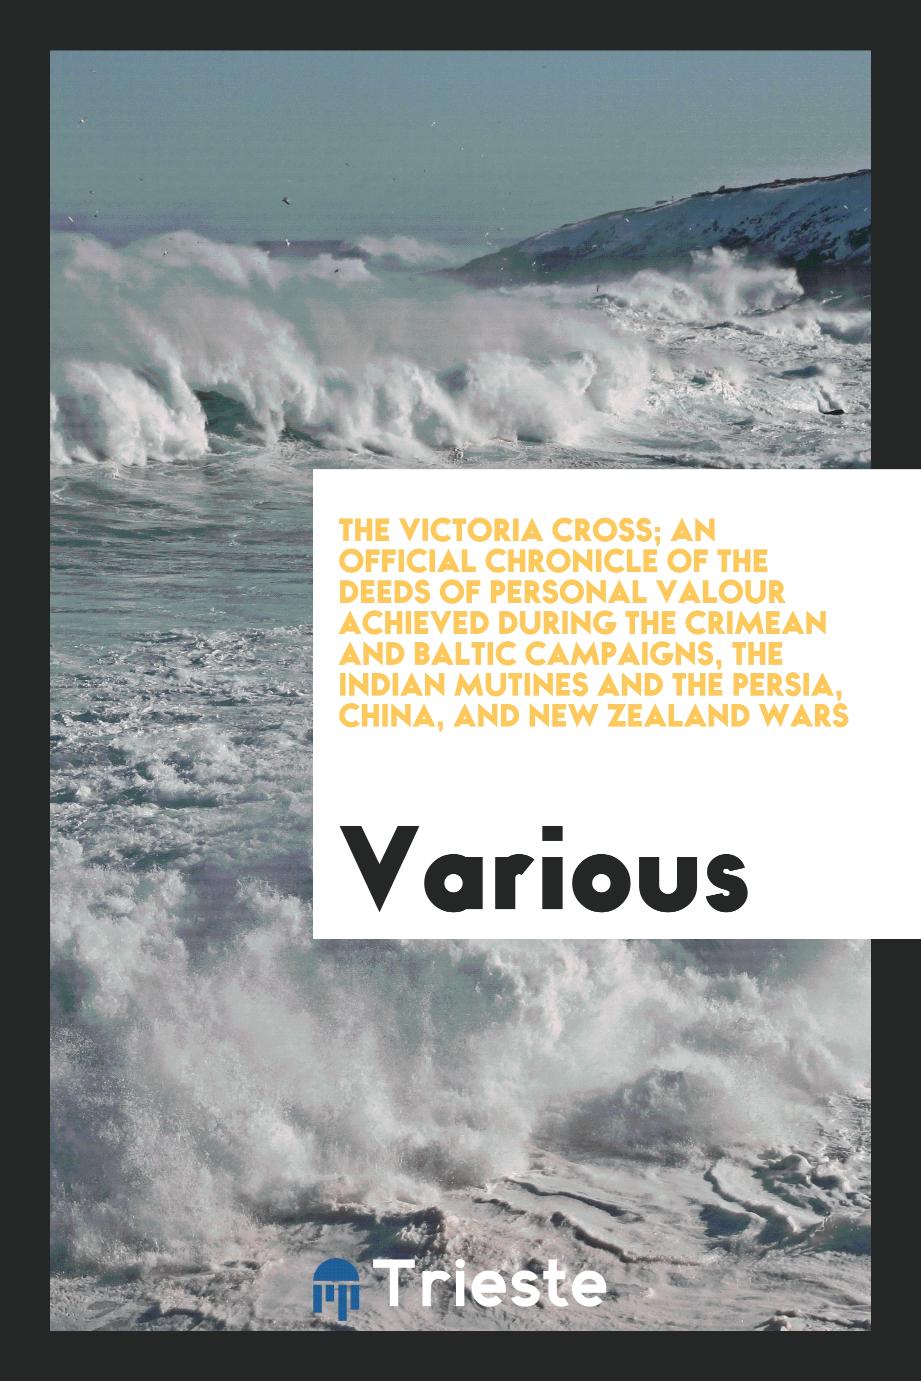 The Victoria Cross; An Official Chronicle of the Deeds of Personal Valour Achieved during the Crimean and Baltic Campaigns, the Indian Mutines and the Persia, China, and New Zealand Wars